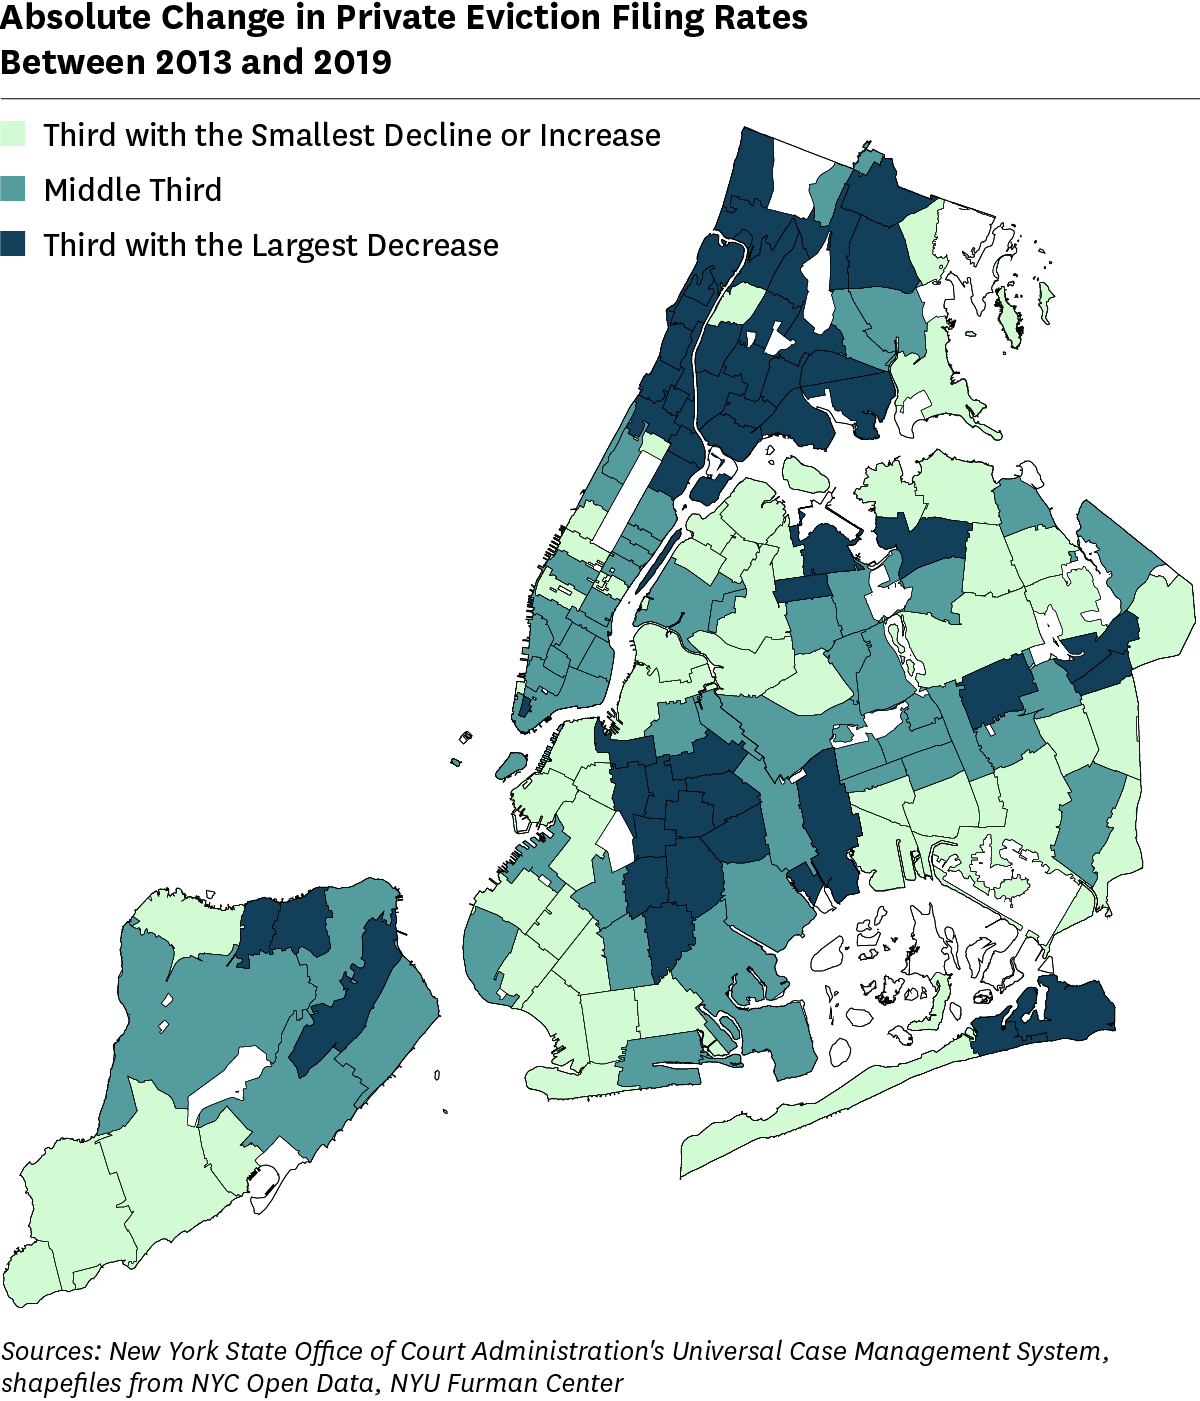 Map showing absolute change in rate of private evictions fillings, between 2013 and 2019, by ZIP Code.